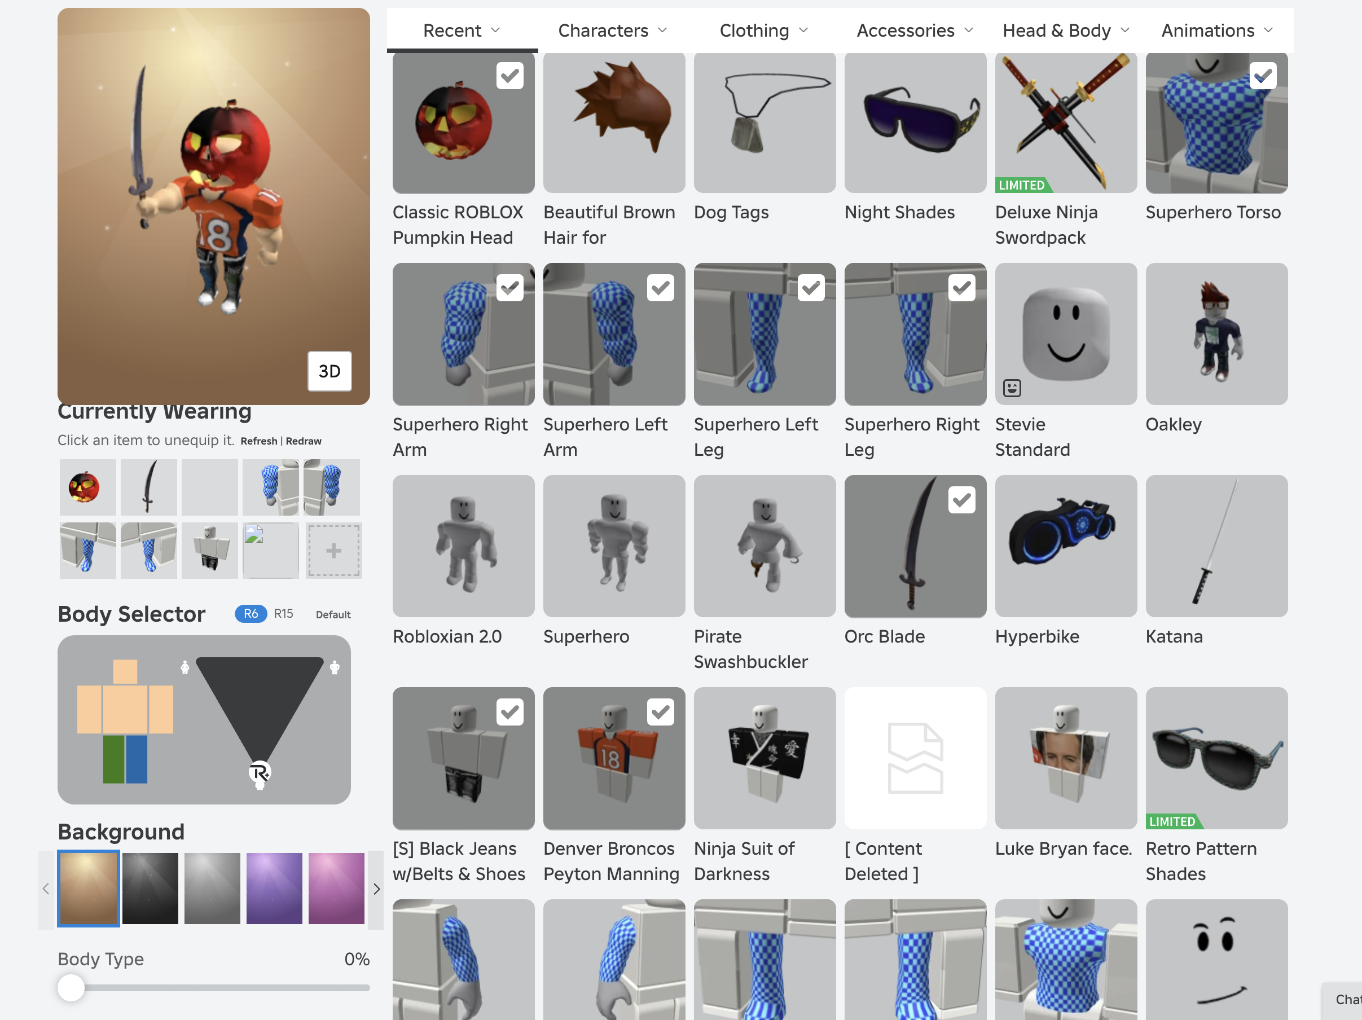 ROBLOX 2012 Account | Offsales / Limiteds | Classic Pumpkin + Wisest Wizard | 10,000+ Robux SPENT | Rare Items | Unverified | 12+ Years Join Date